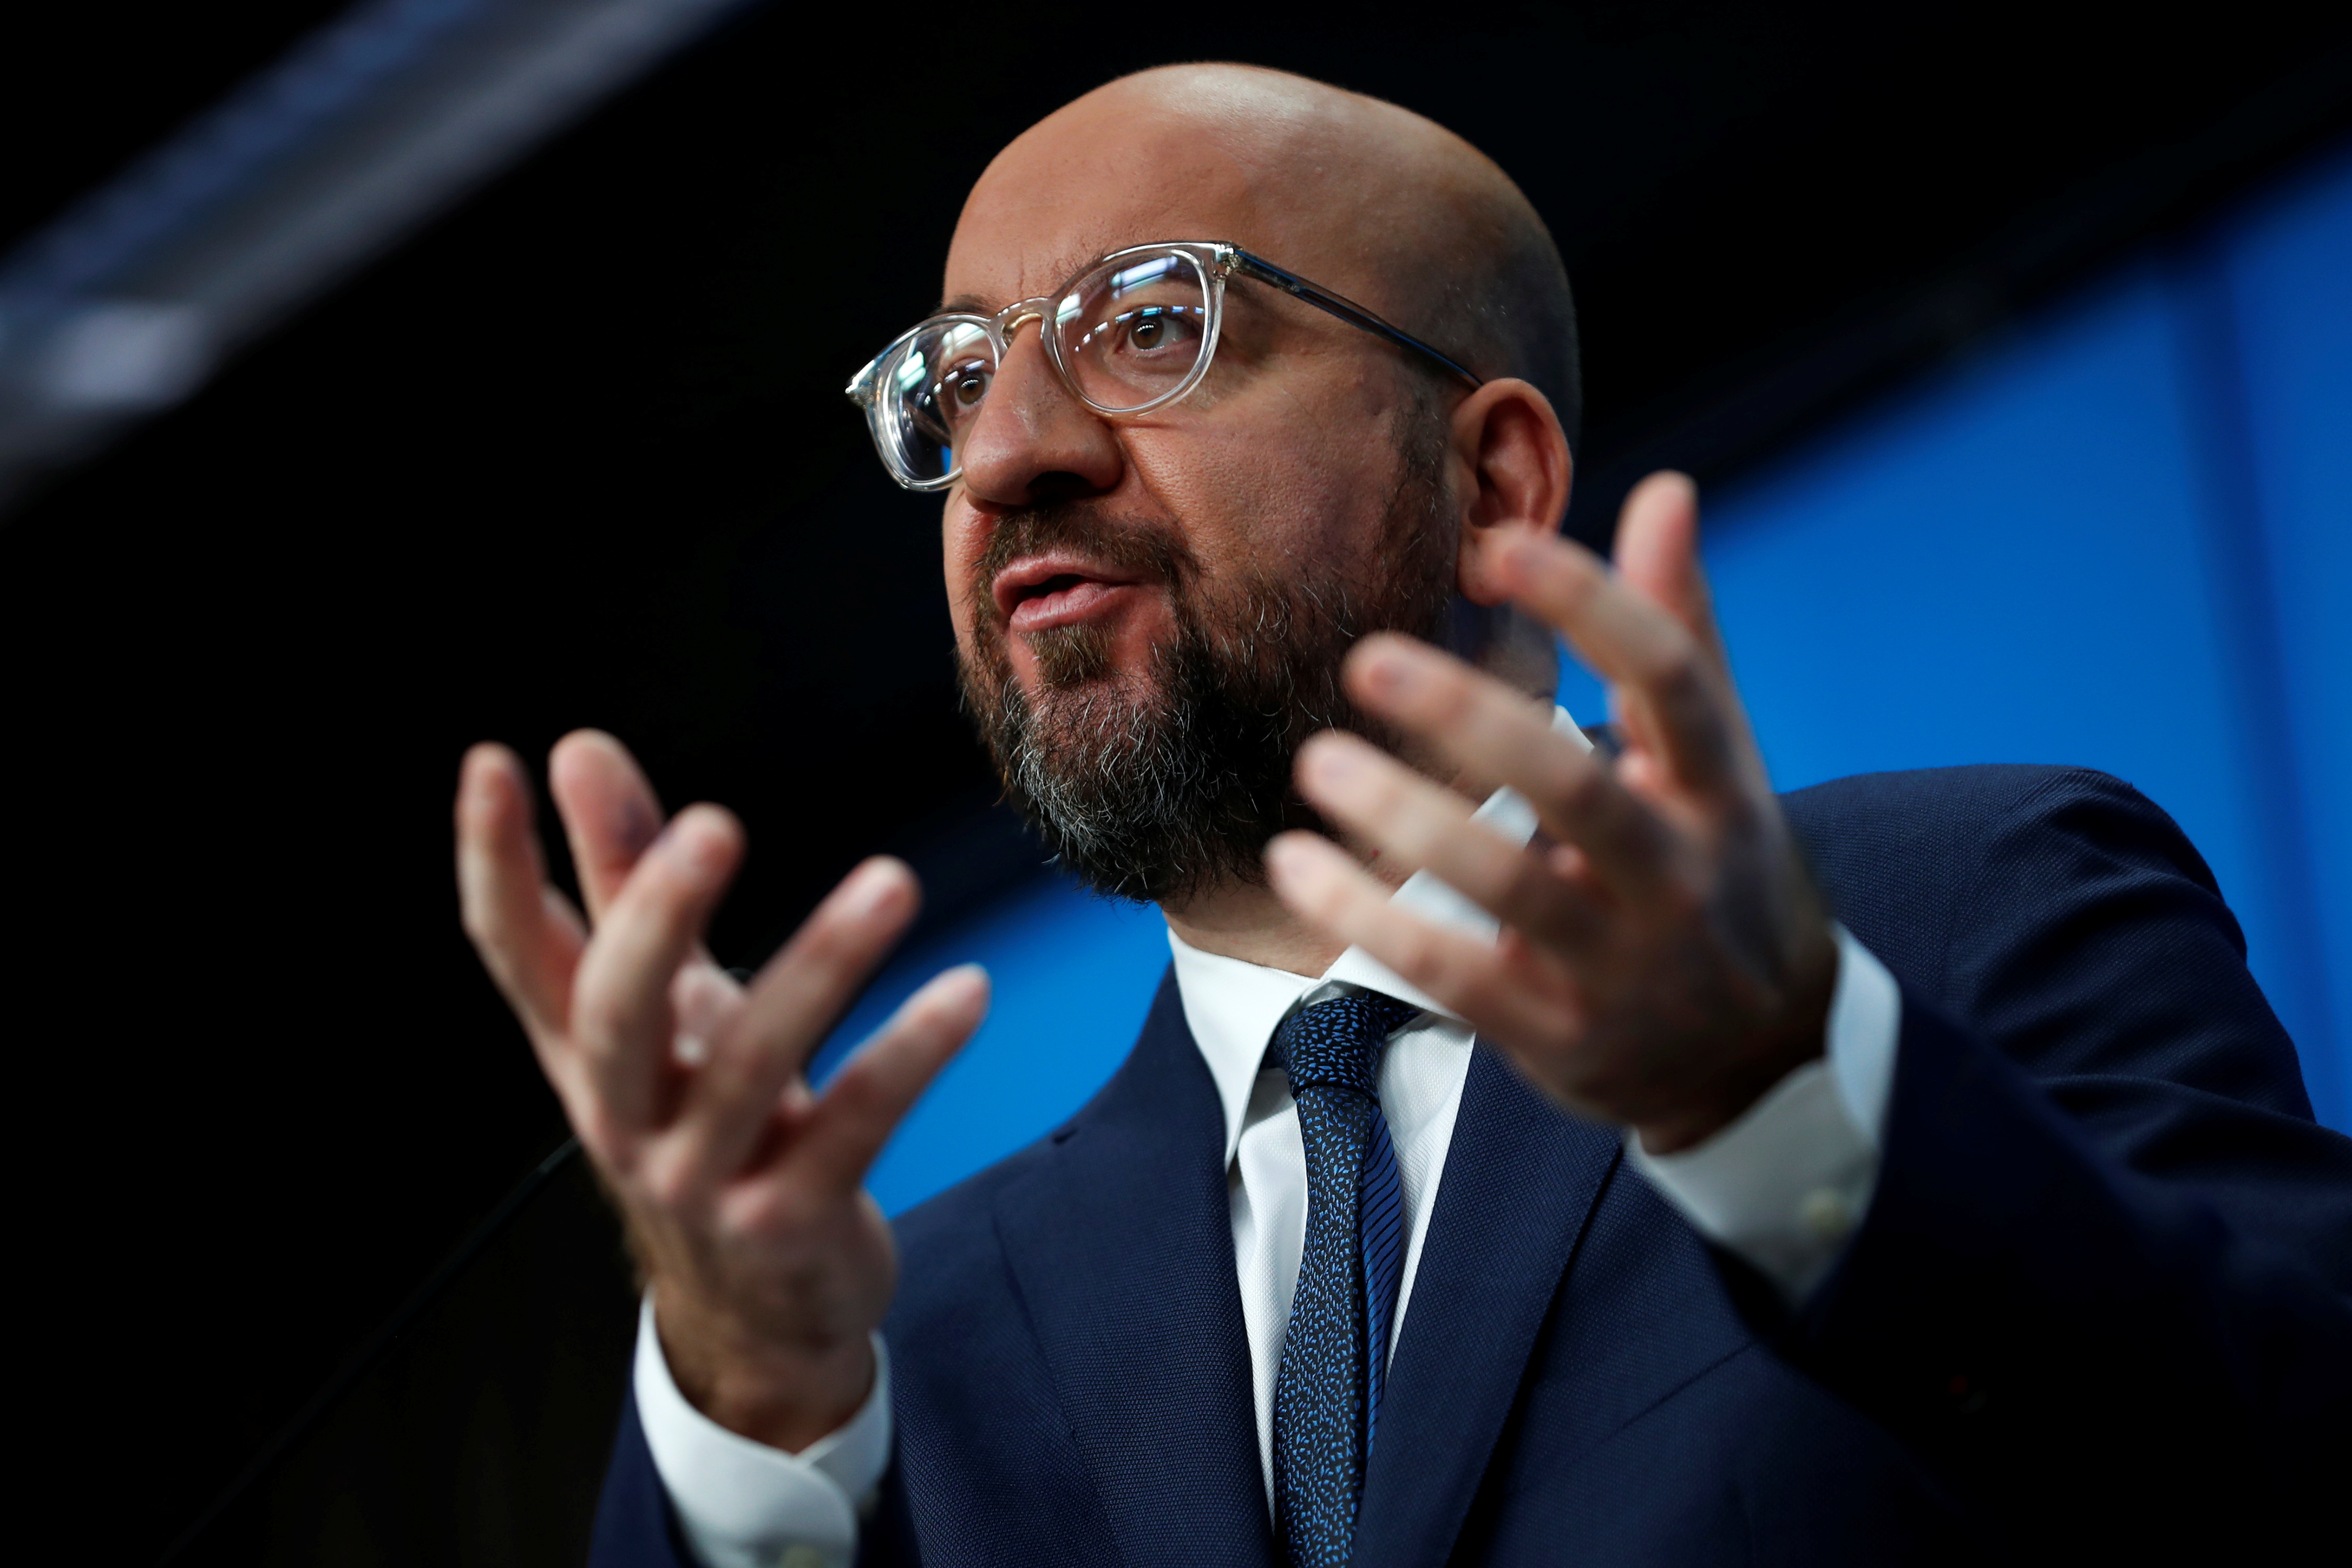 EU Council President Charles Michel talks during a news conference on the future challenges the European Union will have to face, in Brussels